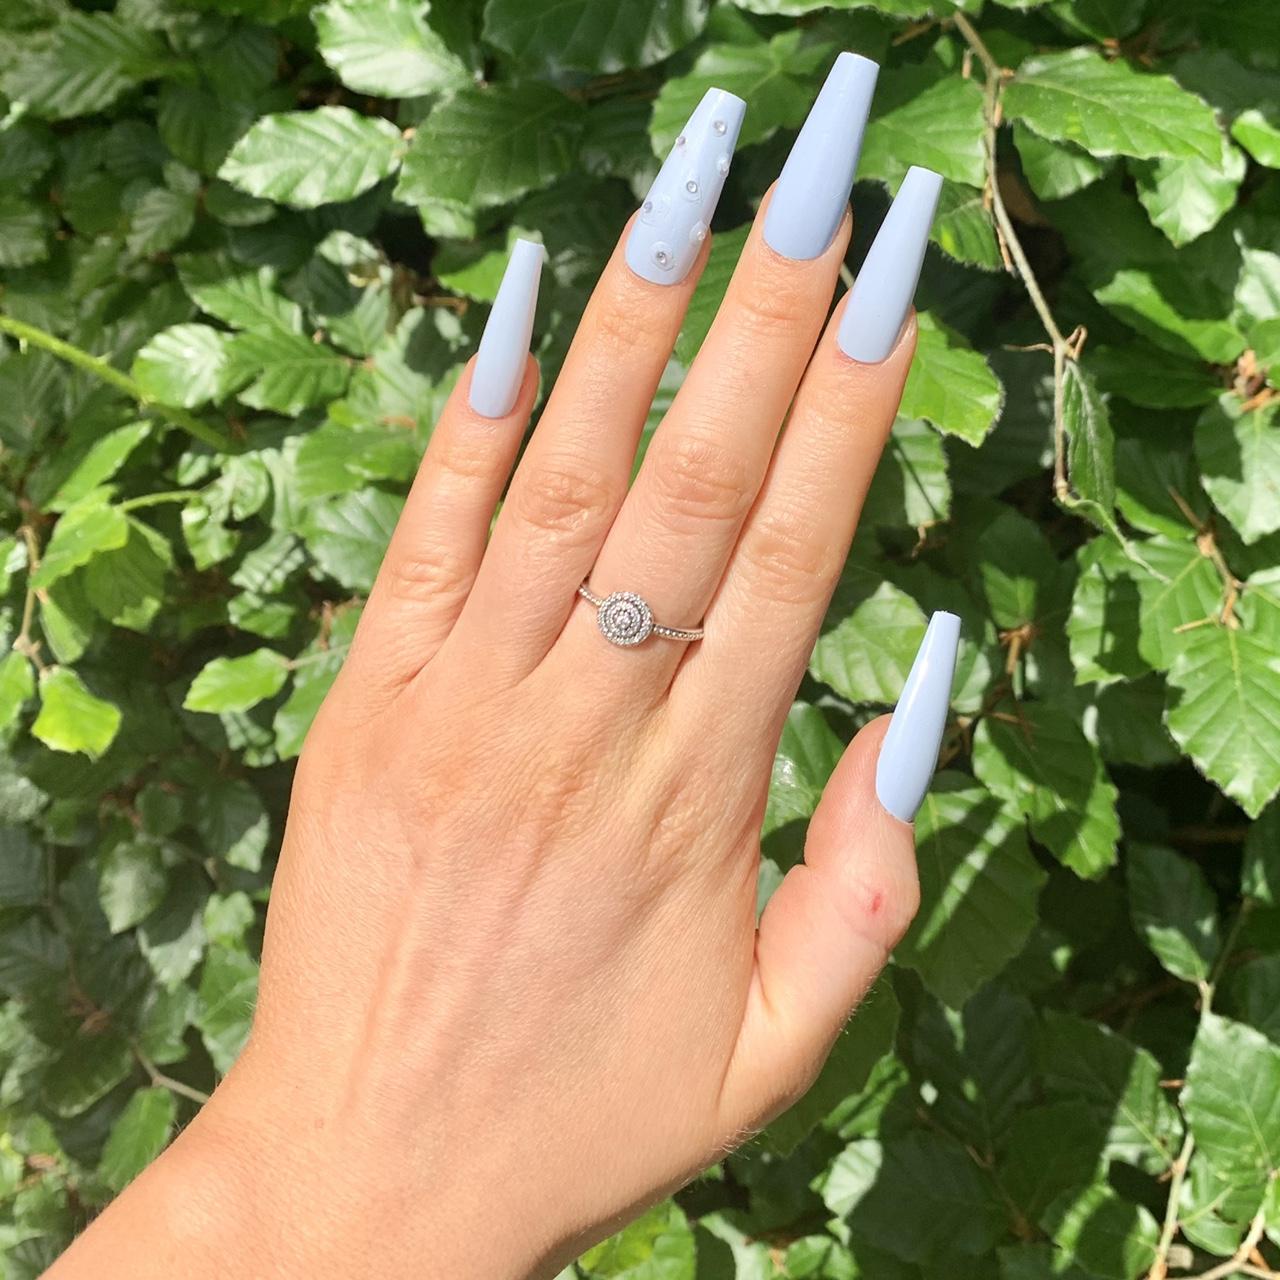 23 Stunning Ways to Wear Baby Blue Nails #baby #blue #acrylic #nails #coffin  #matte #babyblueacryli… | Baby blue acrylic nails, Blue matte nails, Blue  acrylic nails